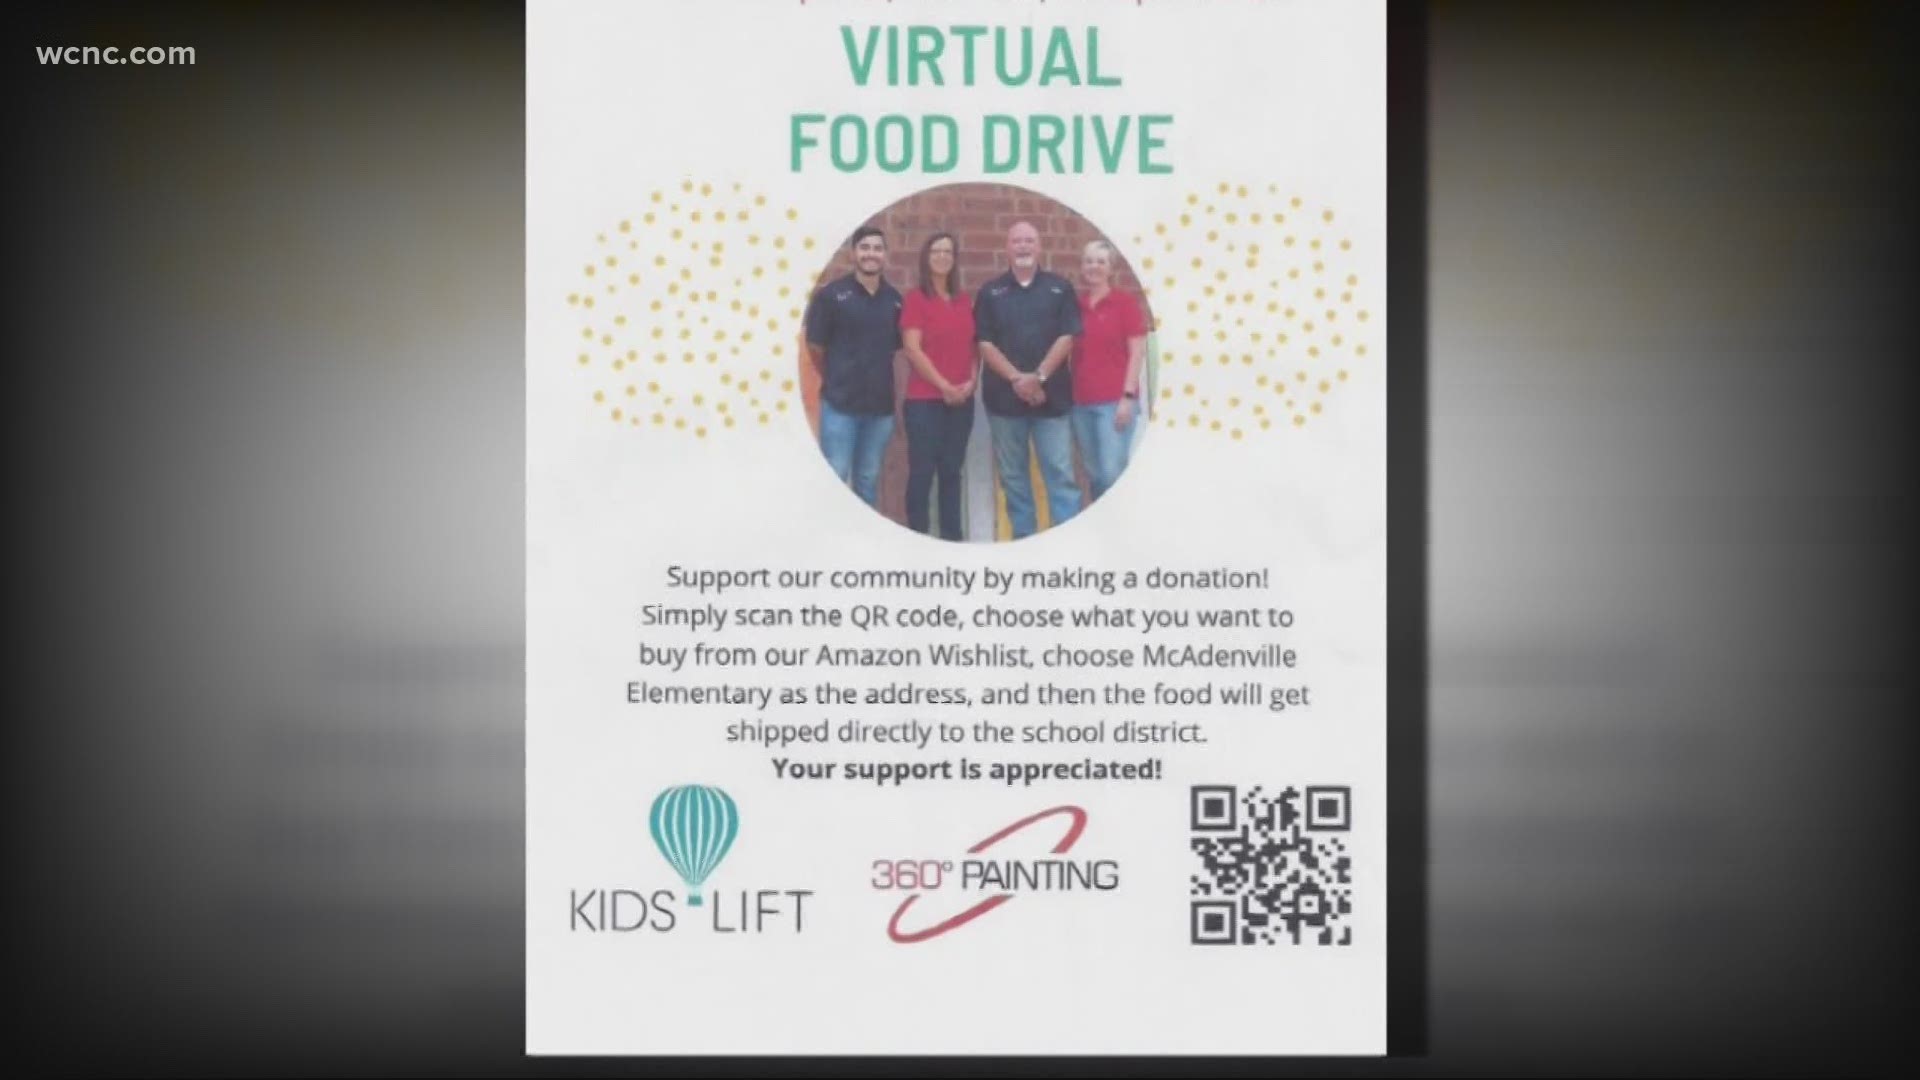 The food drive is conducted almost entirely online to promote pandemic safety.